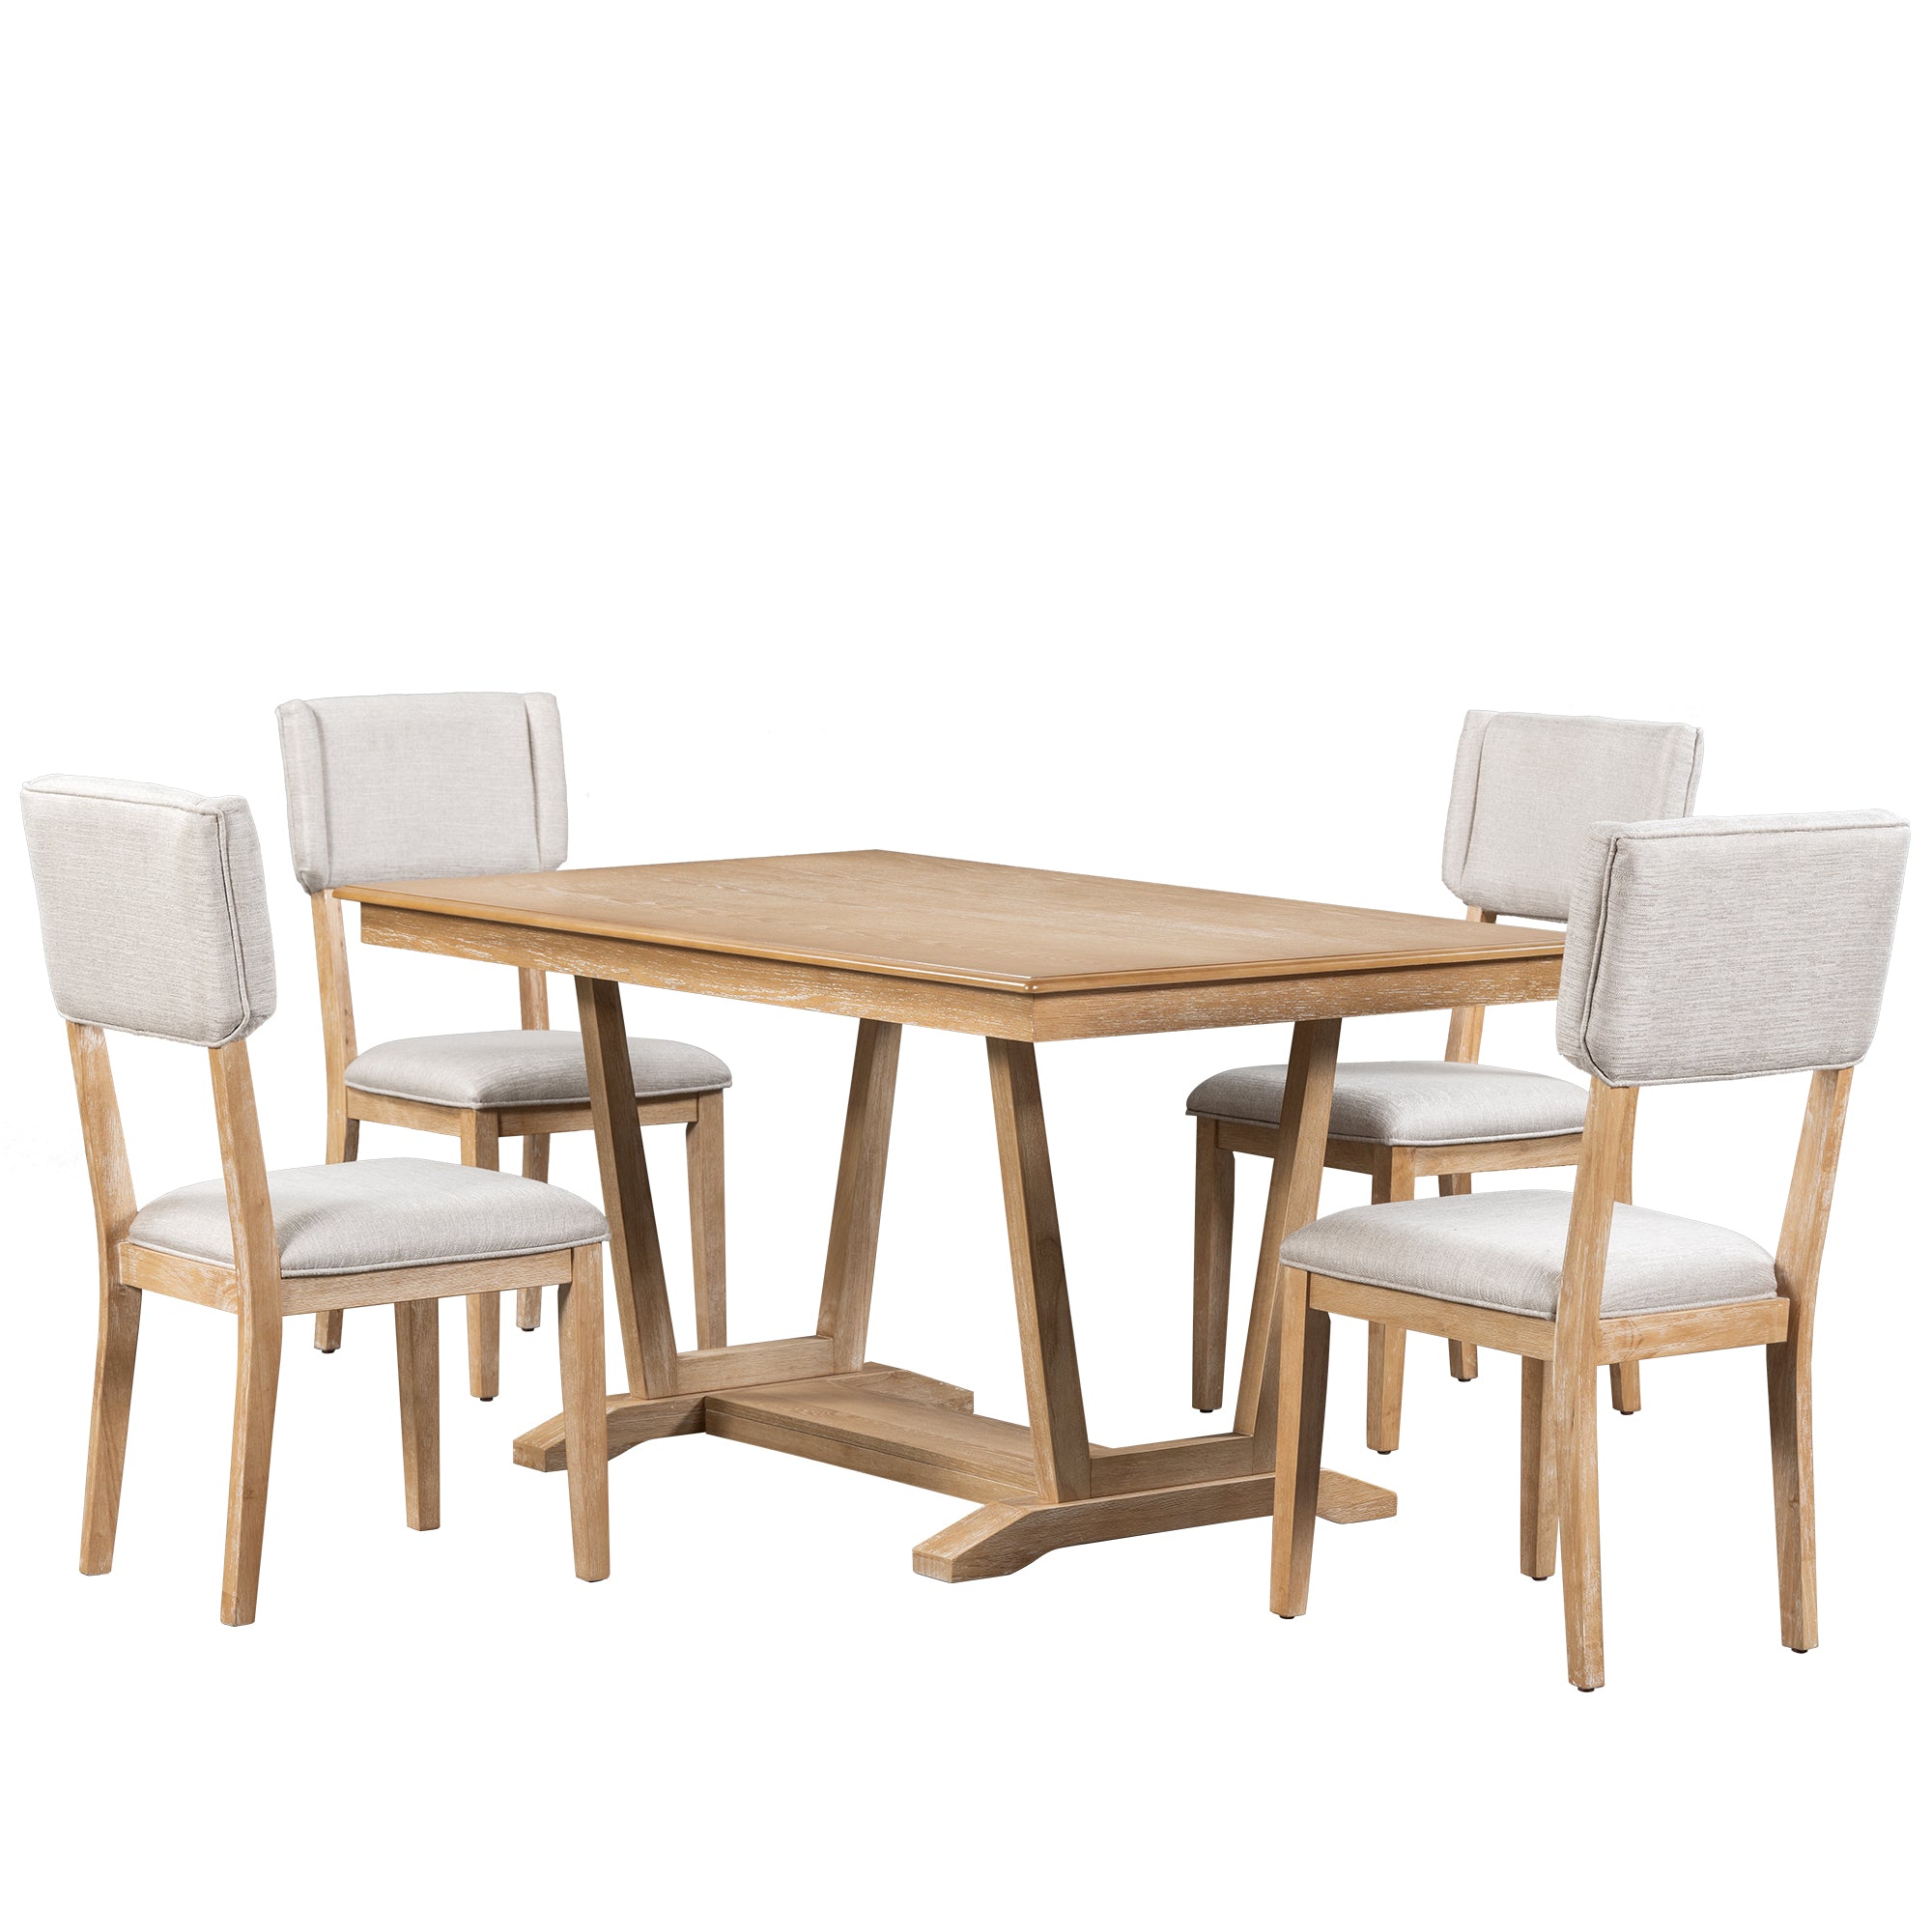 Bellemave 59" Rustic 5-piece Dining Table Set with 4 Upholstered Chairs